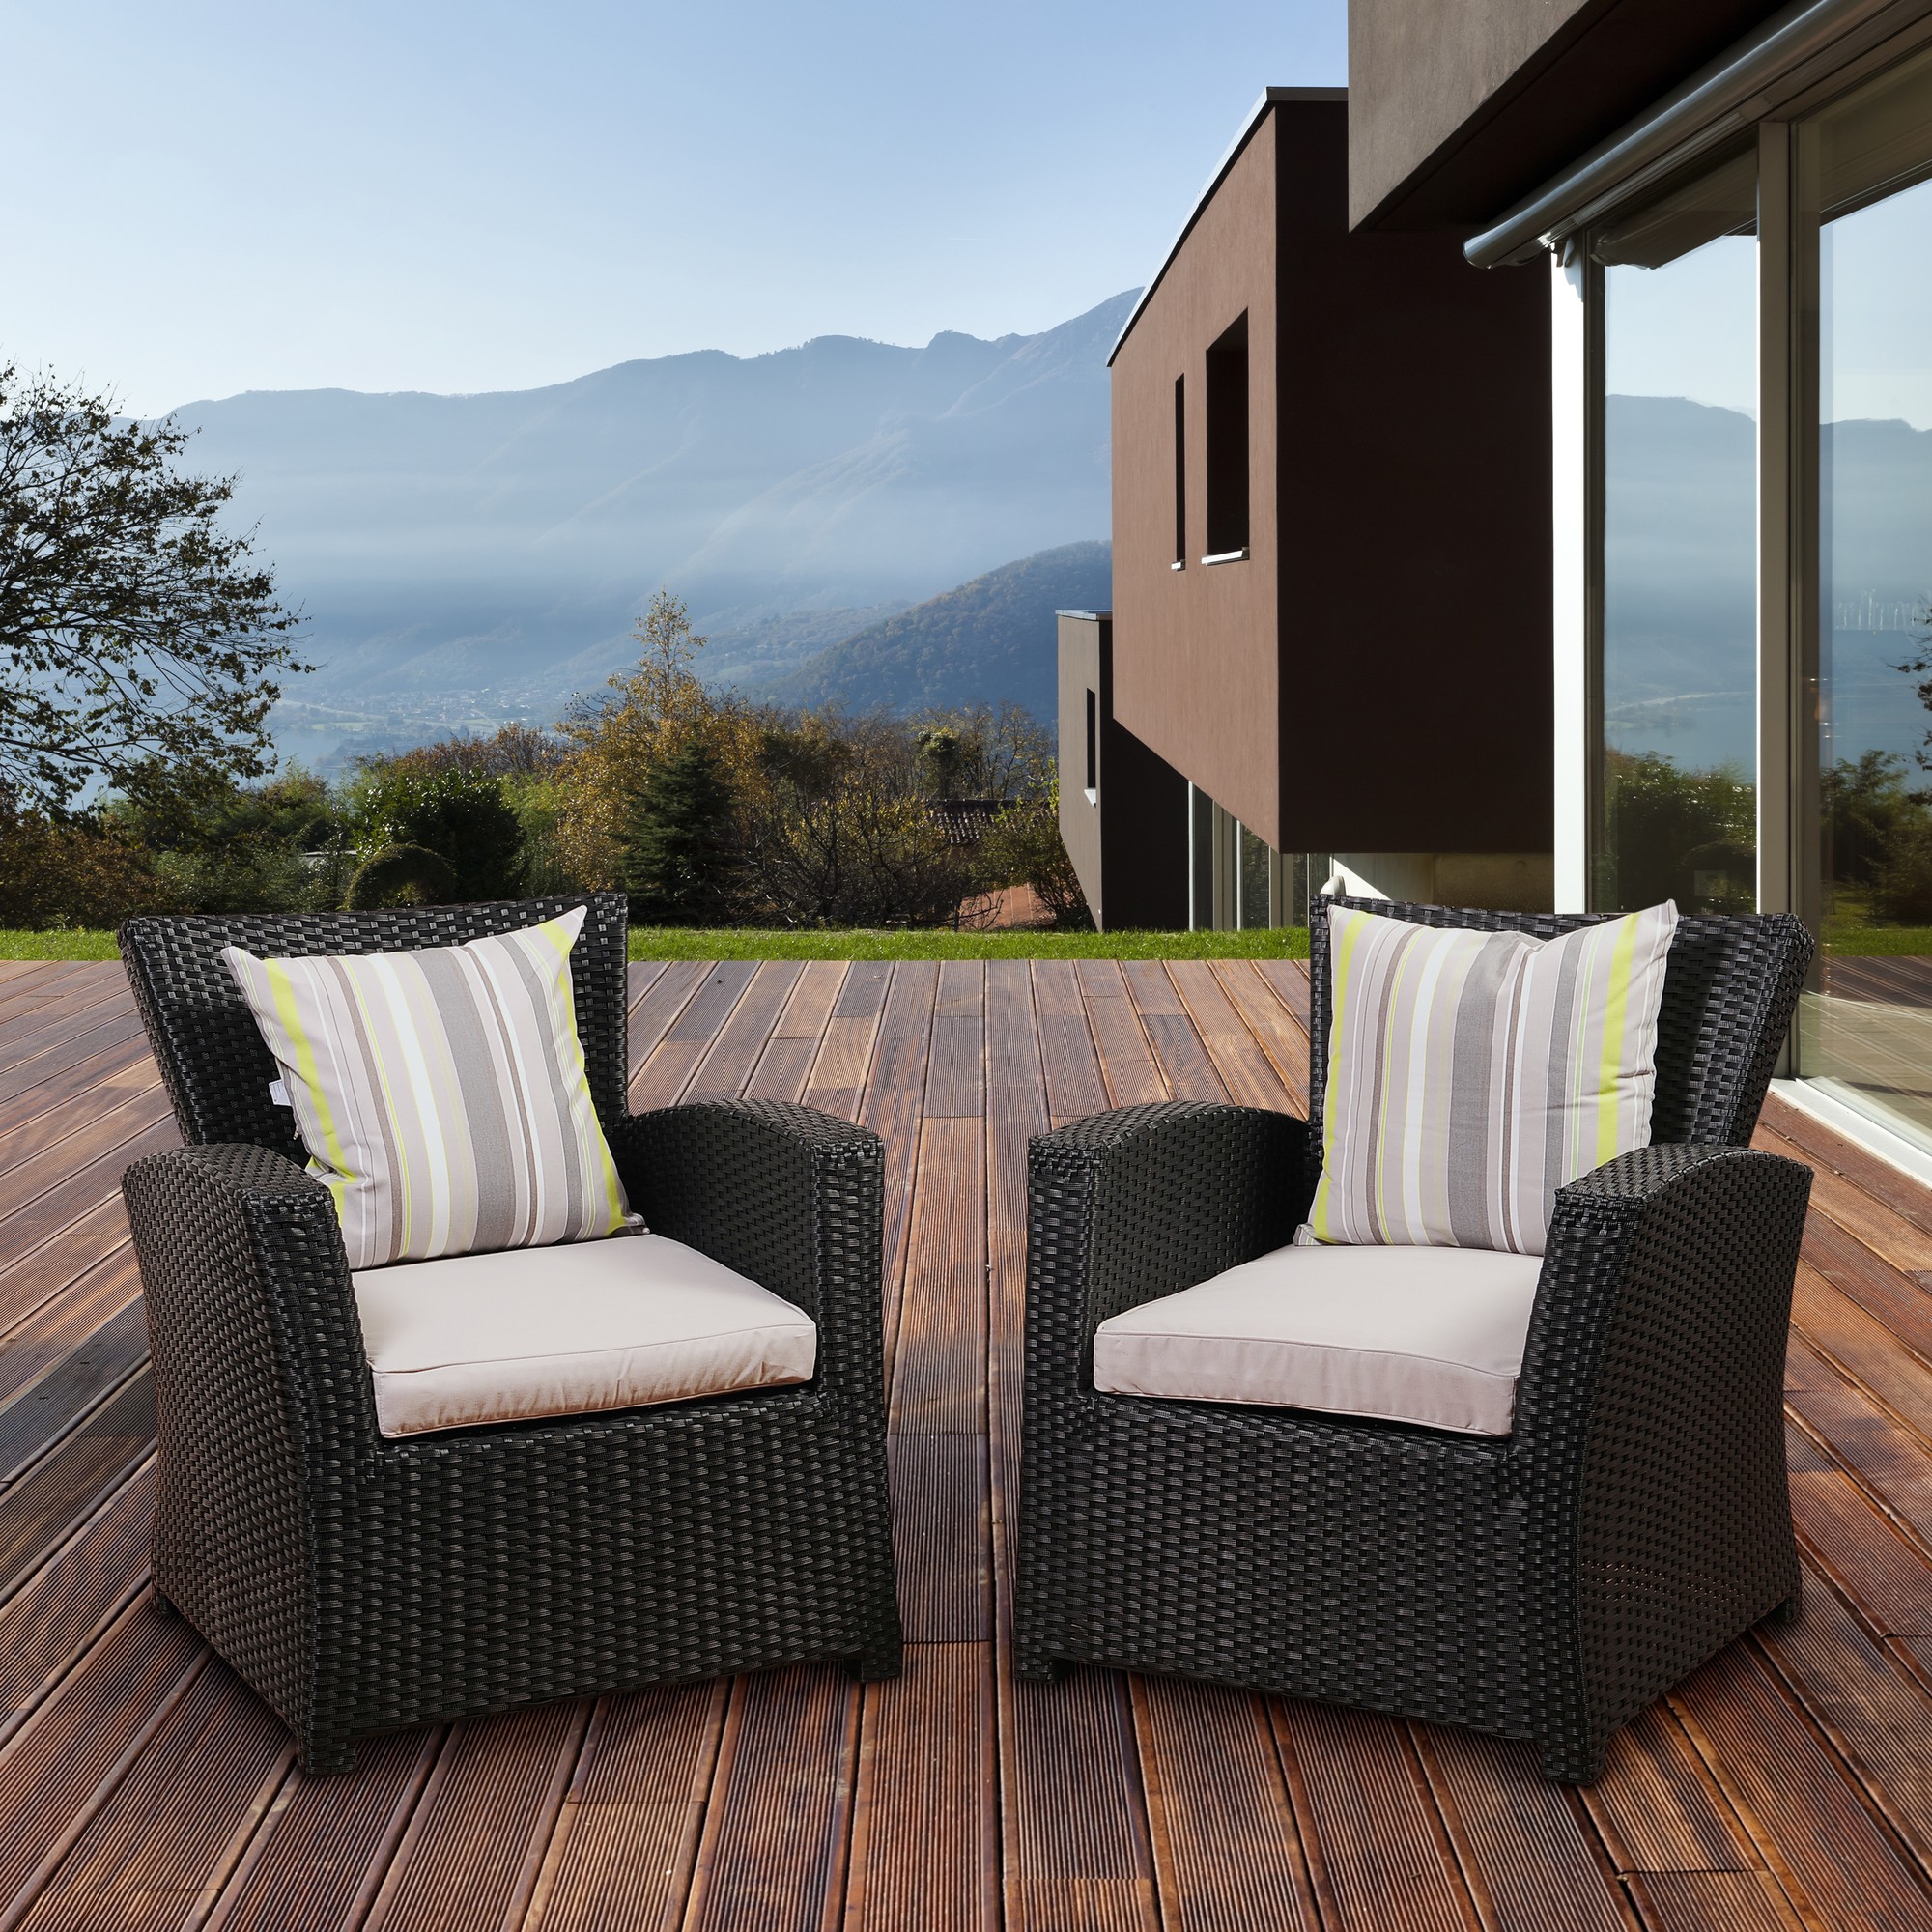 Outdoor Living and Style 2-Piece Black Staffordshire Wicker Outdoor Patio Arm Chair Set 32" - Gray - image 5 of 5